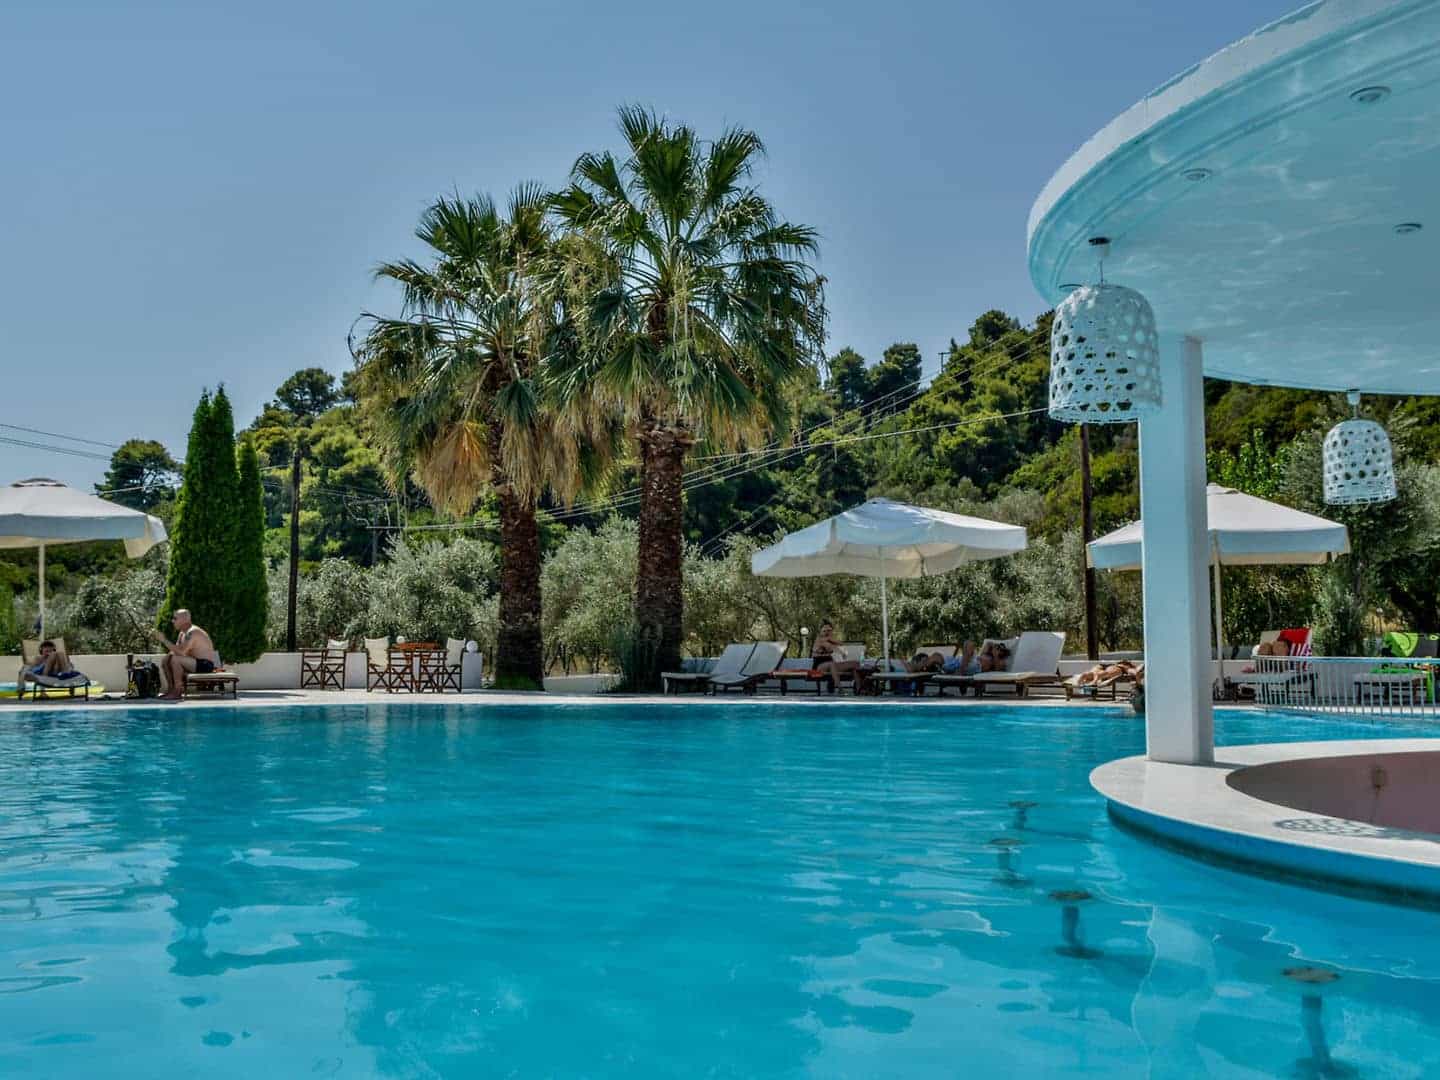 A 5-minute away from Achladies Beach, Belvedere Hotel Skiathos offers you an utmost comfort with an affordable price. Explore the area of Achladies Beach in a walkable distance from our hotel or a 10-min drive from Skiathos Town.